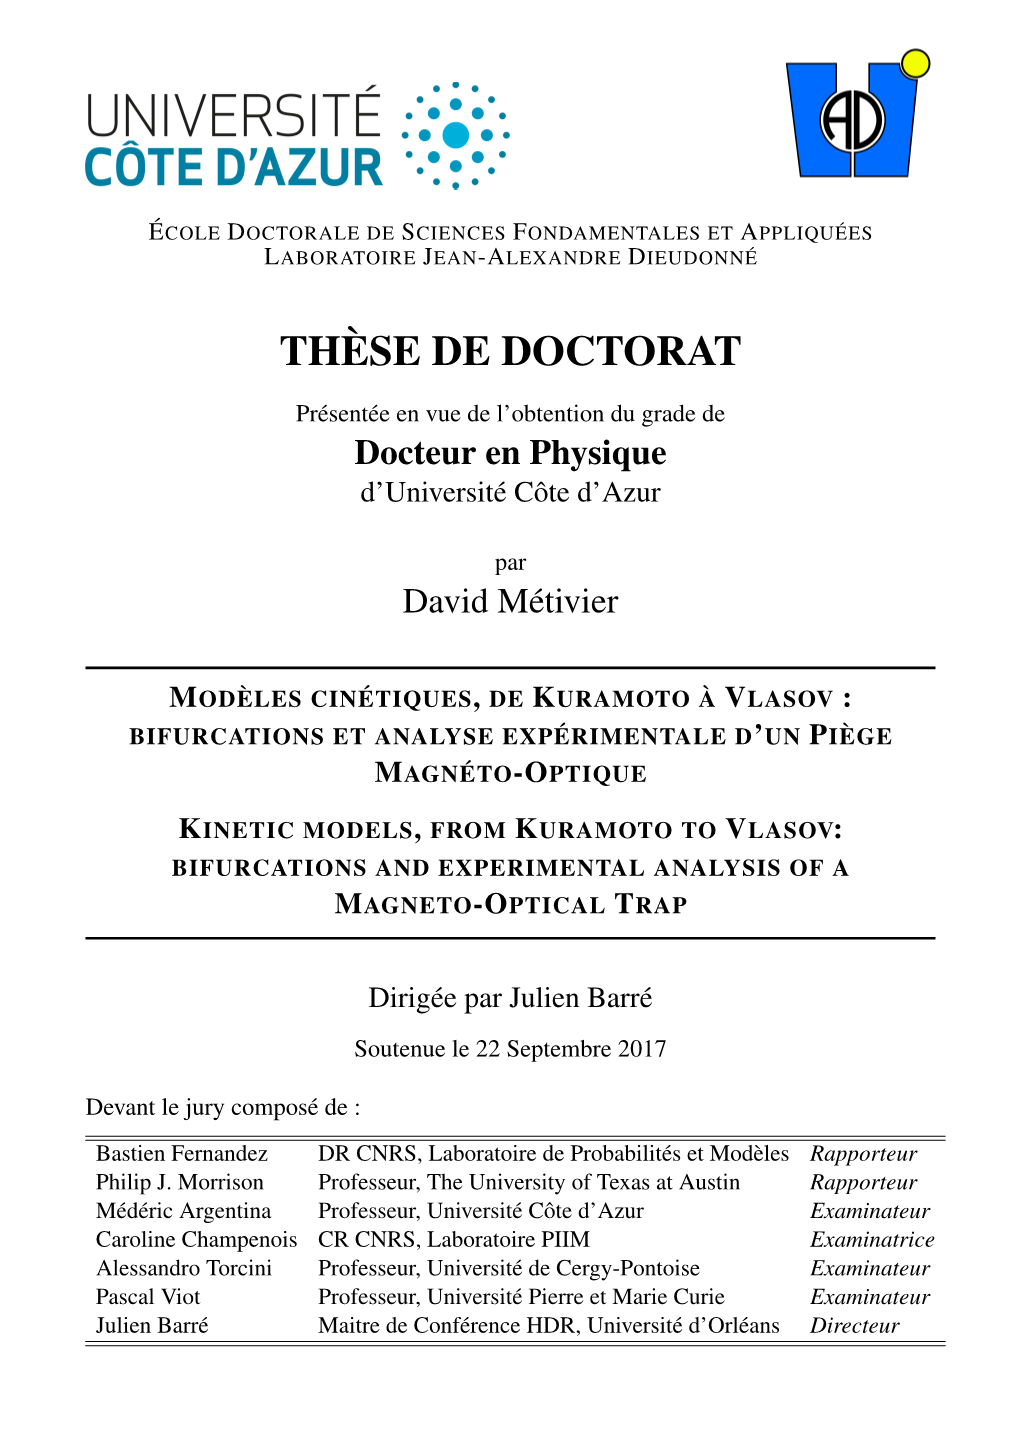 Phd Thesis) Highlights the Crucial Contribution of J.D